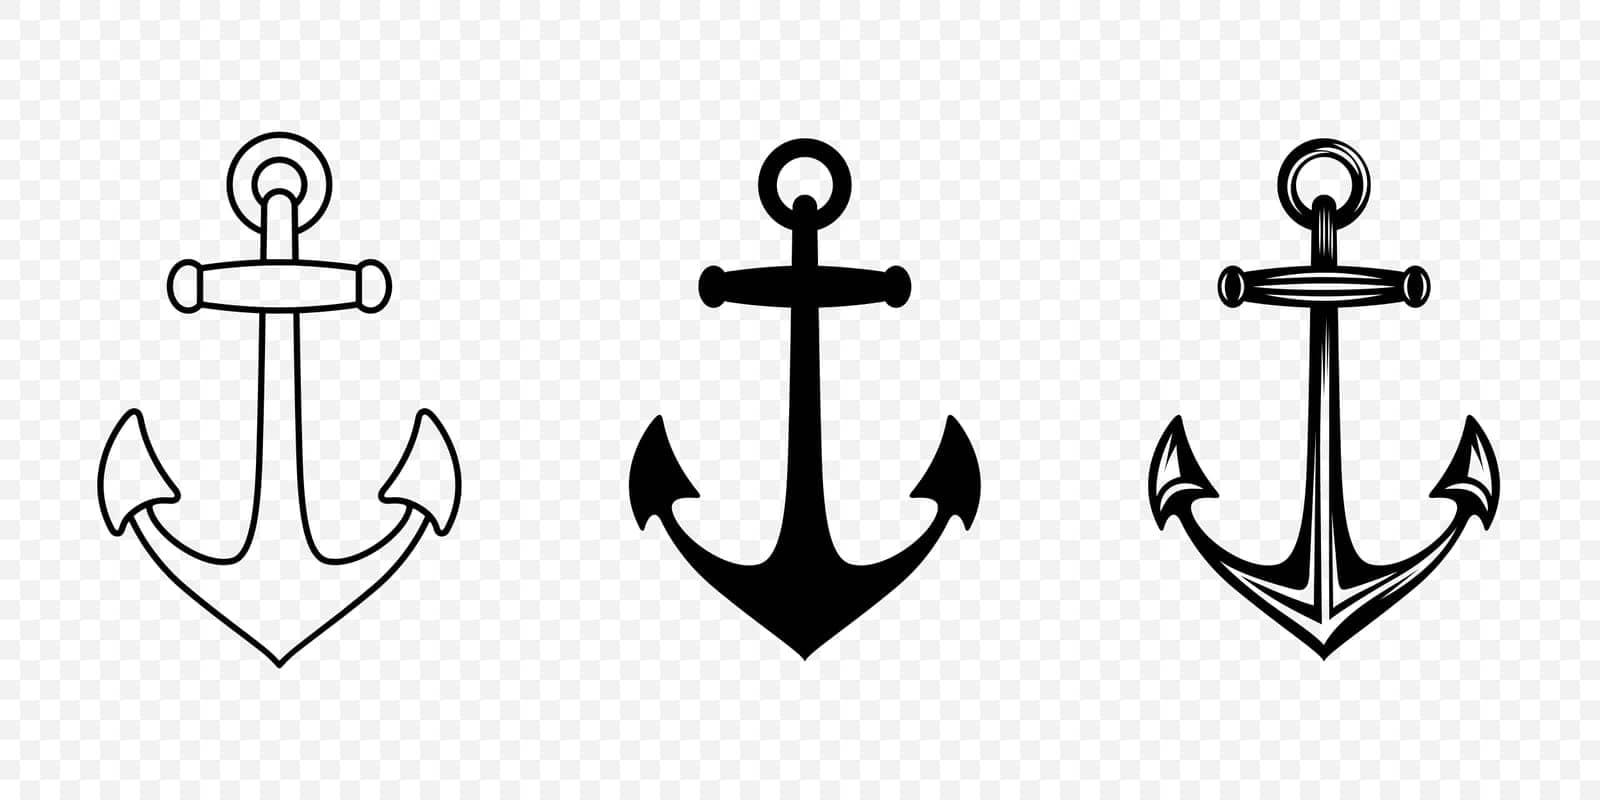 Vector Anchors. Anchor Silhouette Icon Set. Black and White Anchor with Outline. Anchor Design Template Collection. Vector Illustration.